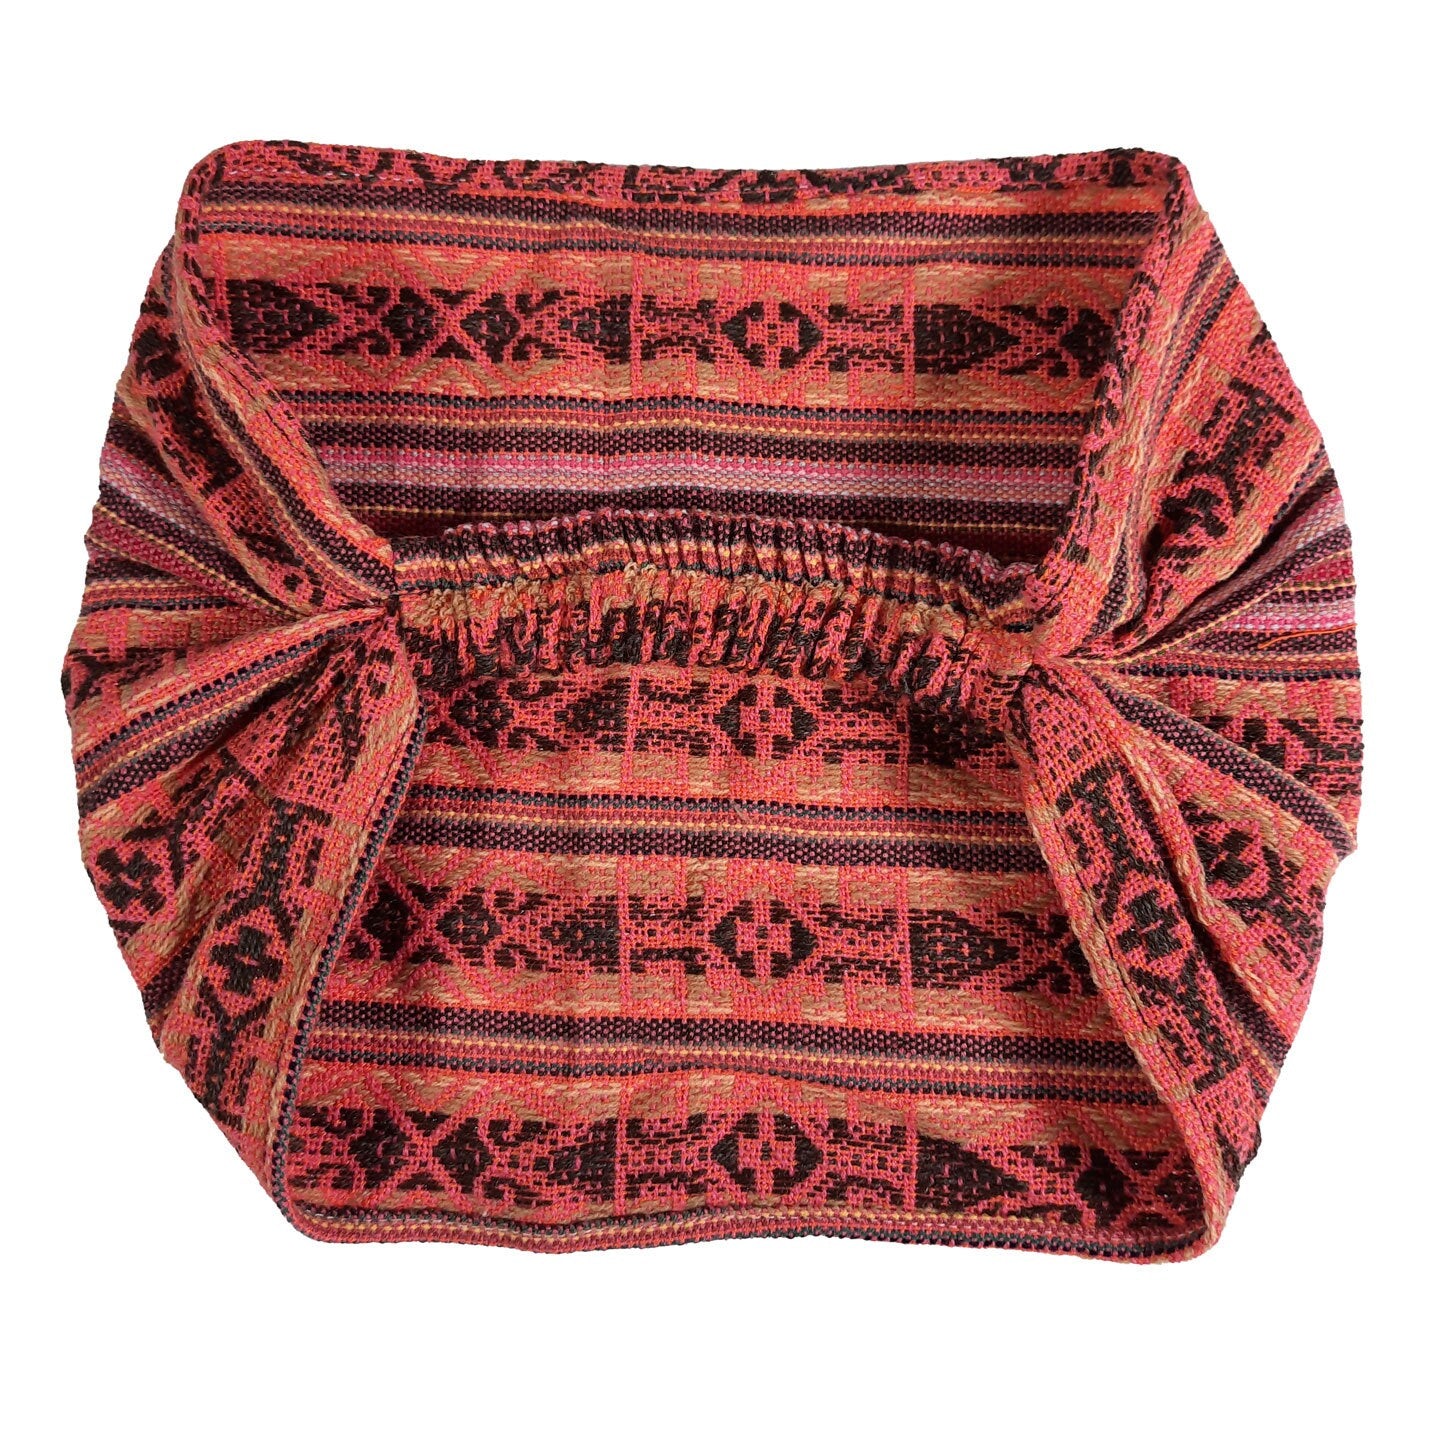 EXTRA LARGE Wide Headband | Coral Brown